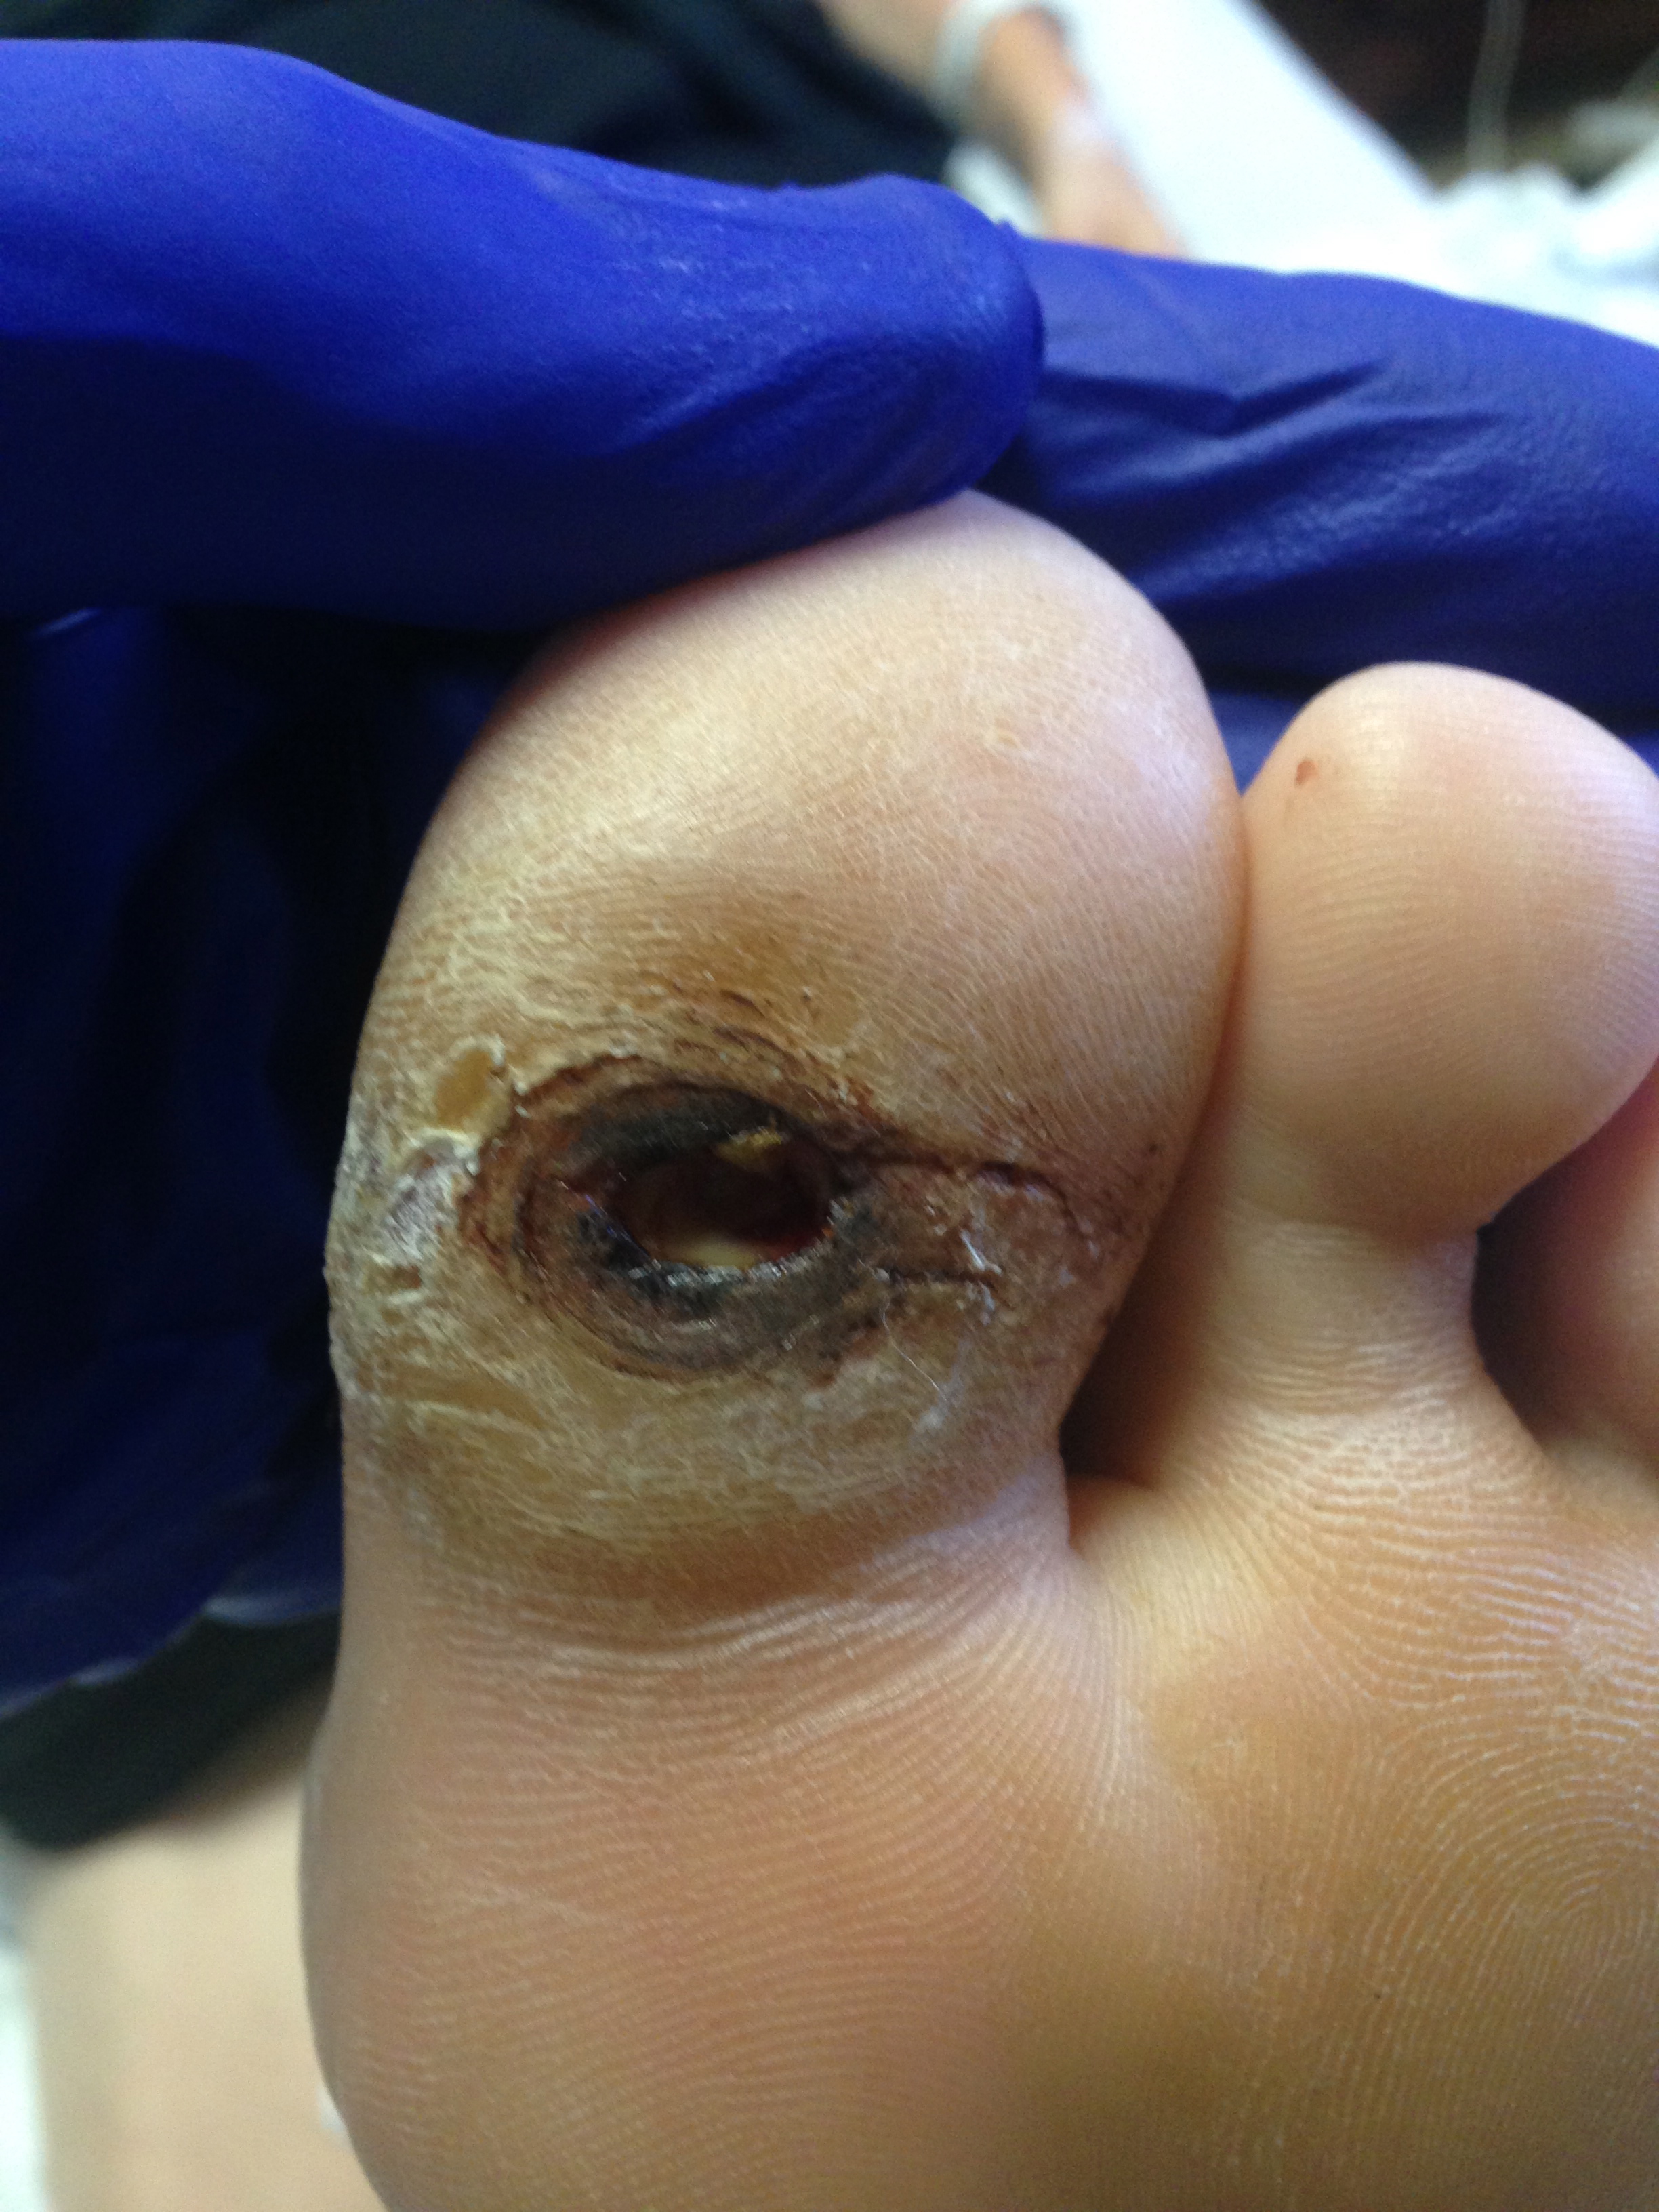 <p>Neuropathic Ulcer. Neuropathic Ulcer beneath the great toe in a patient with diabetes and peripheral neuropathy.</p>